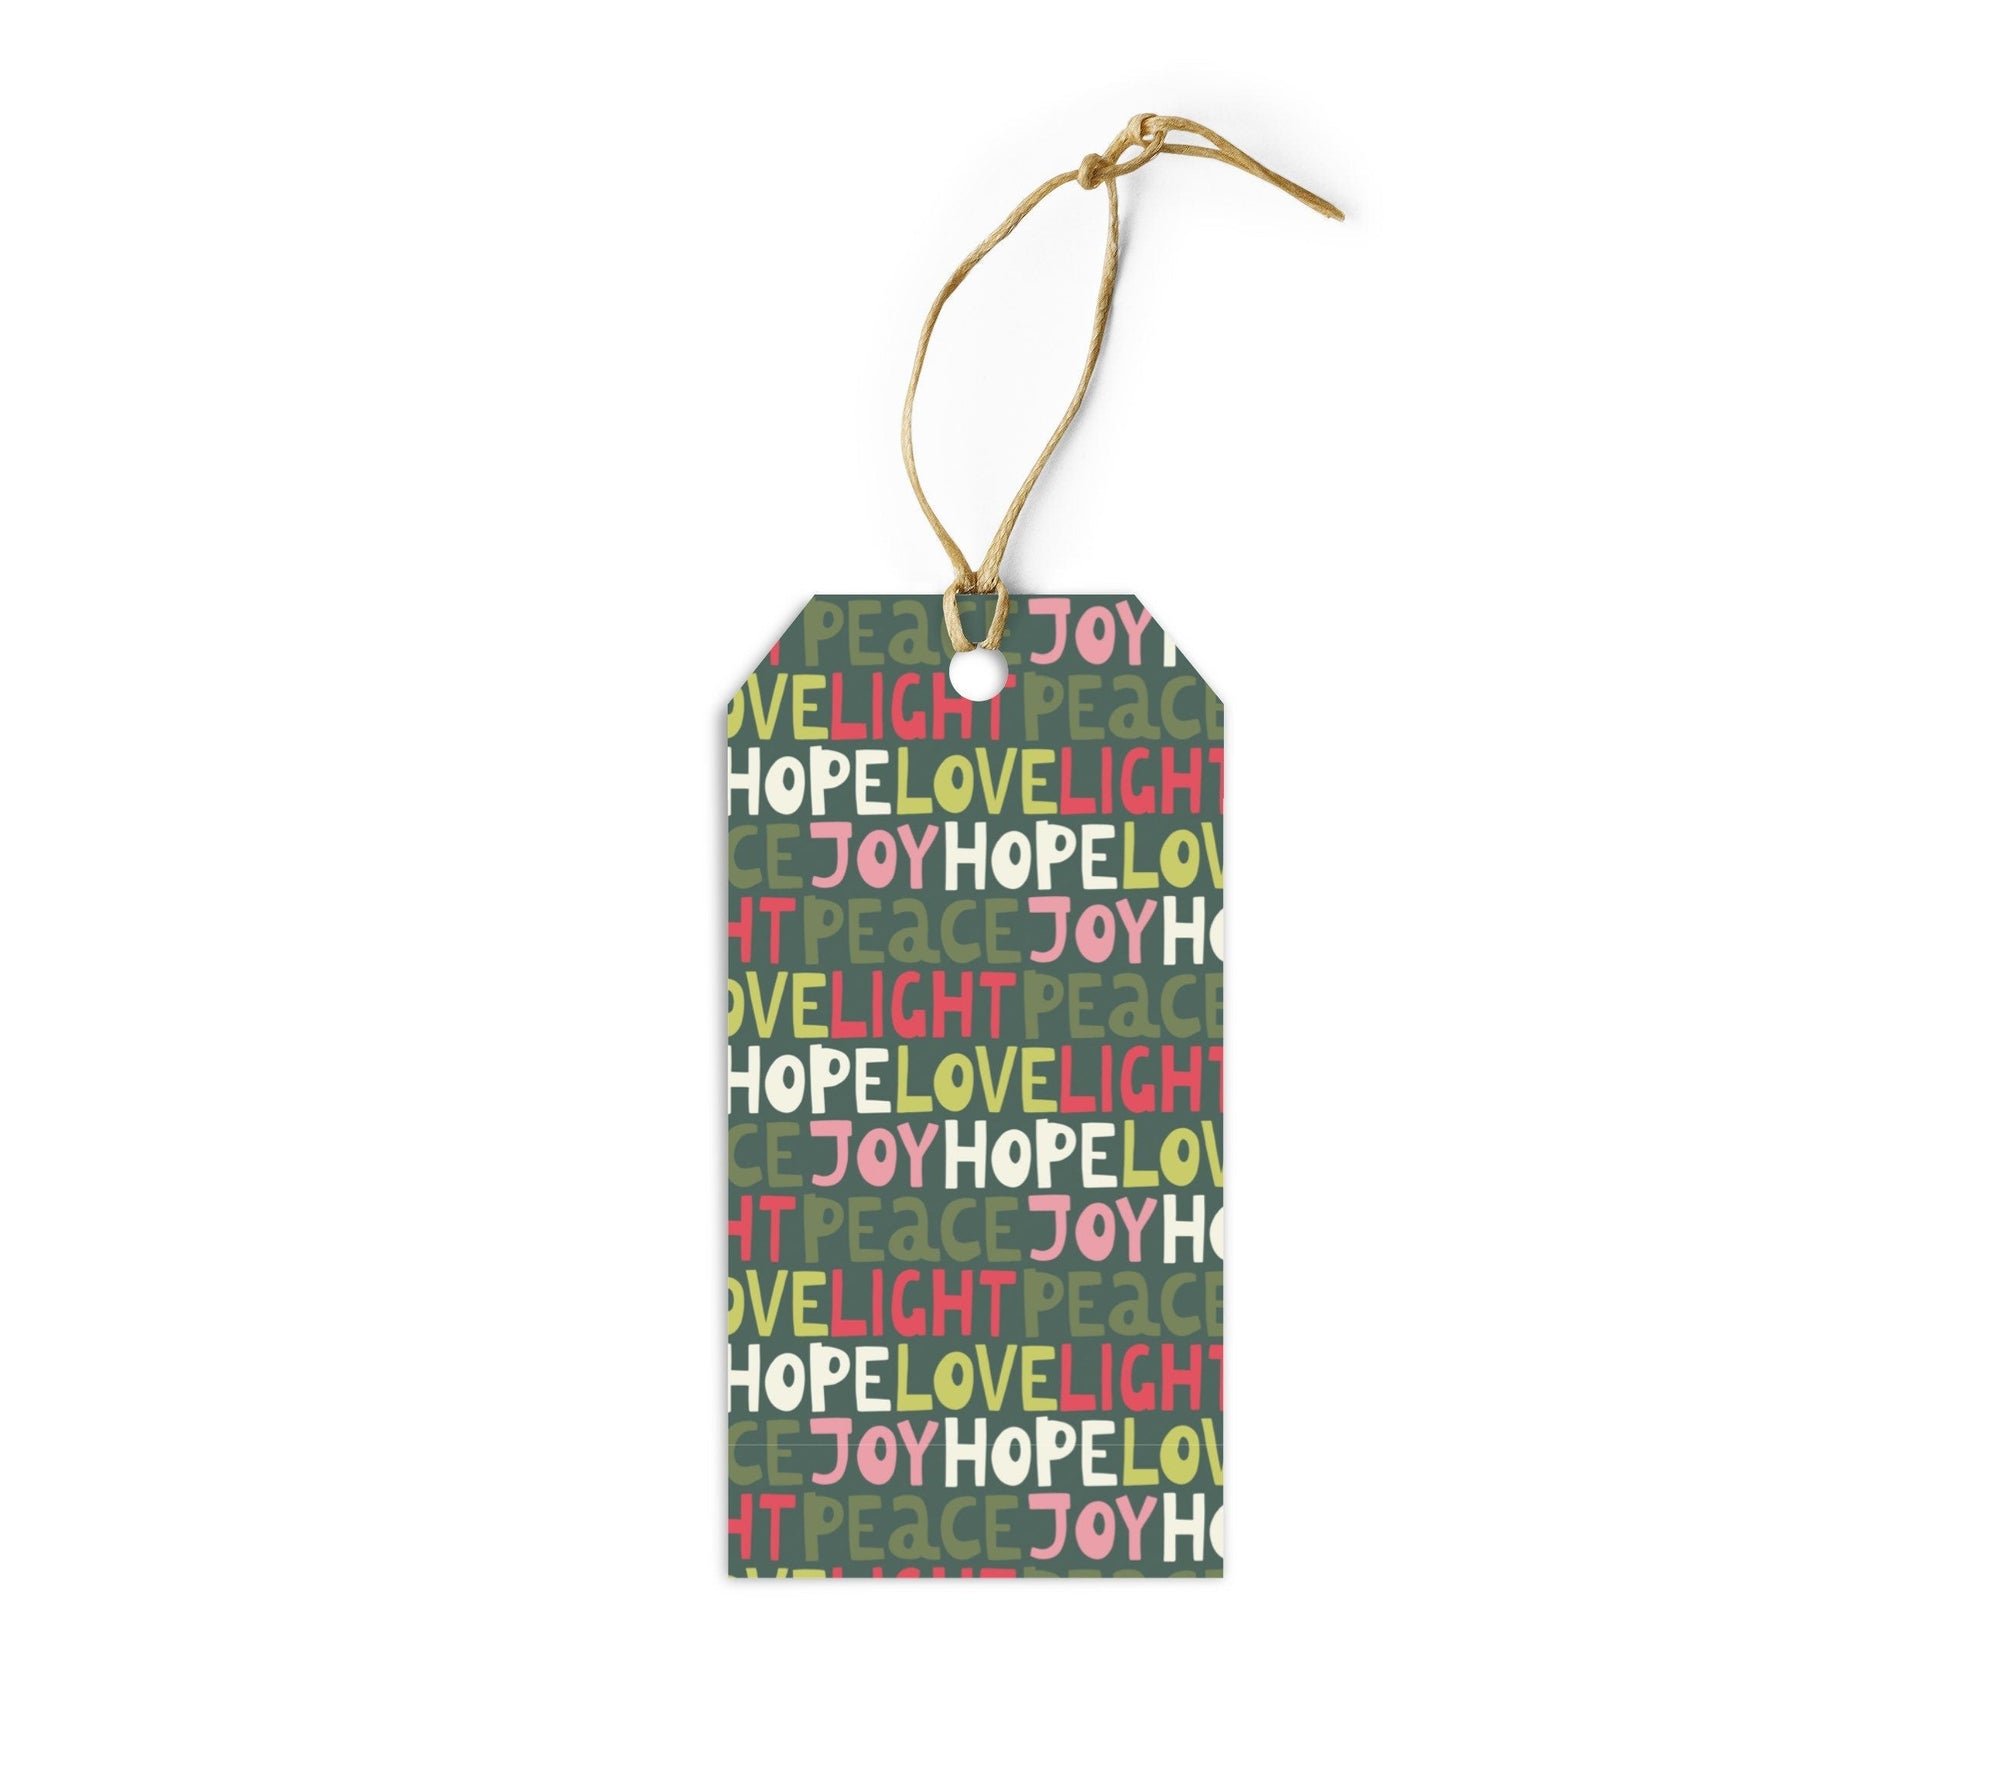 Joy Hope Love Light Peace Gift Tags - Set of 10 Gift Tags &amp; Labels Violagrace-174 